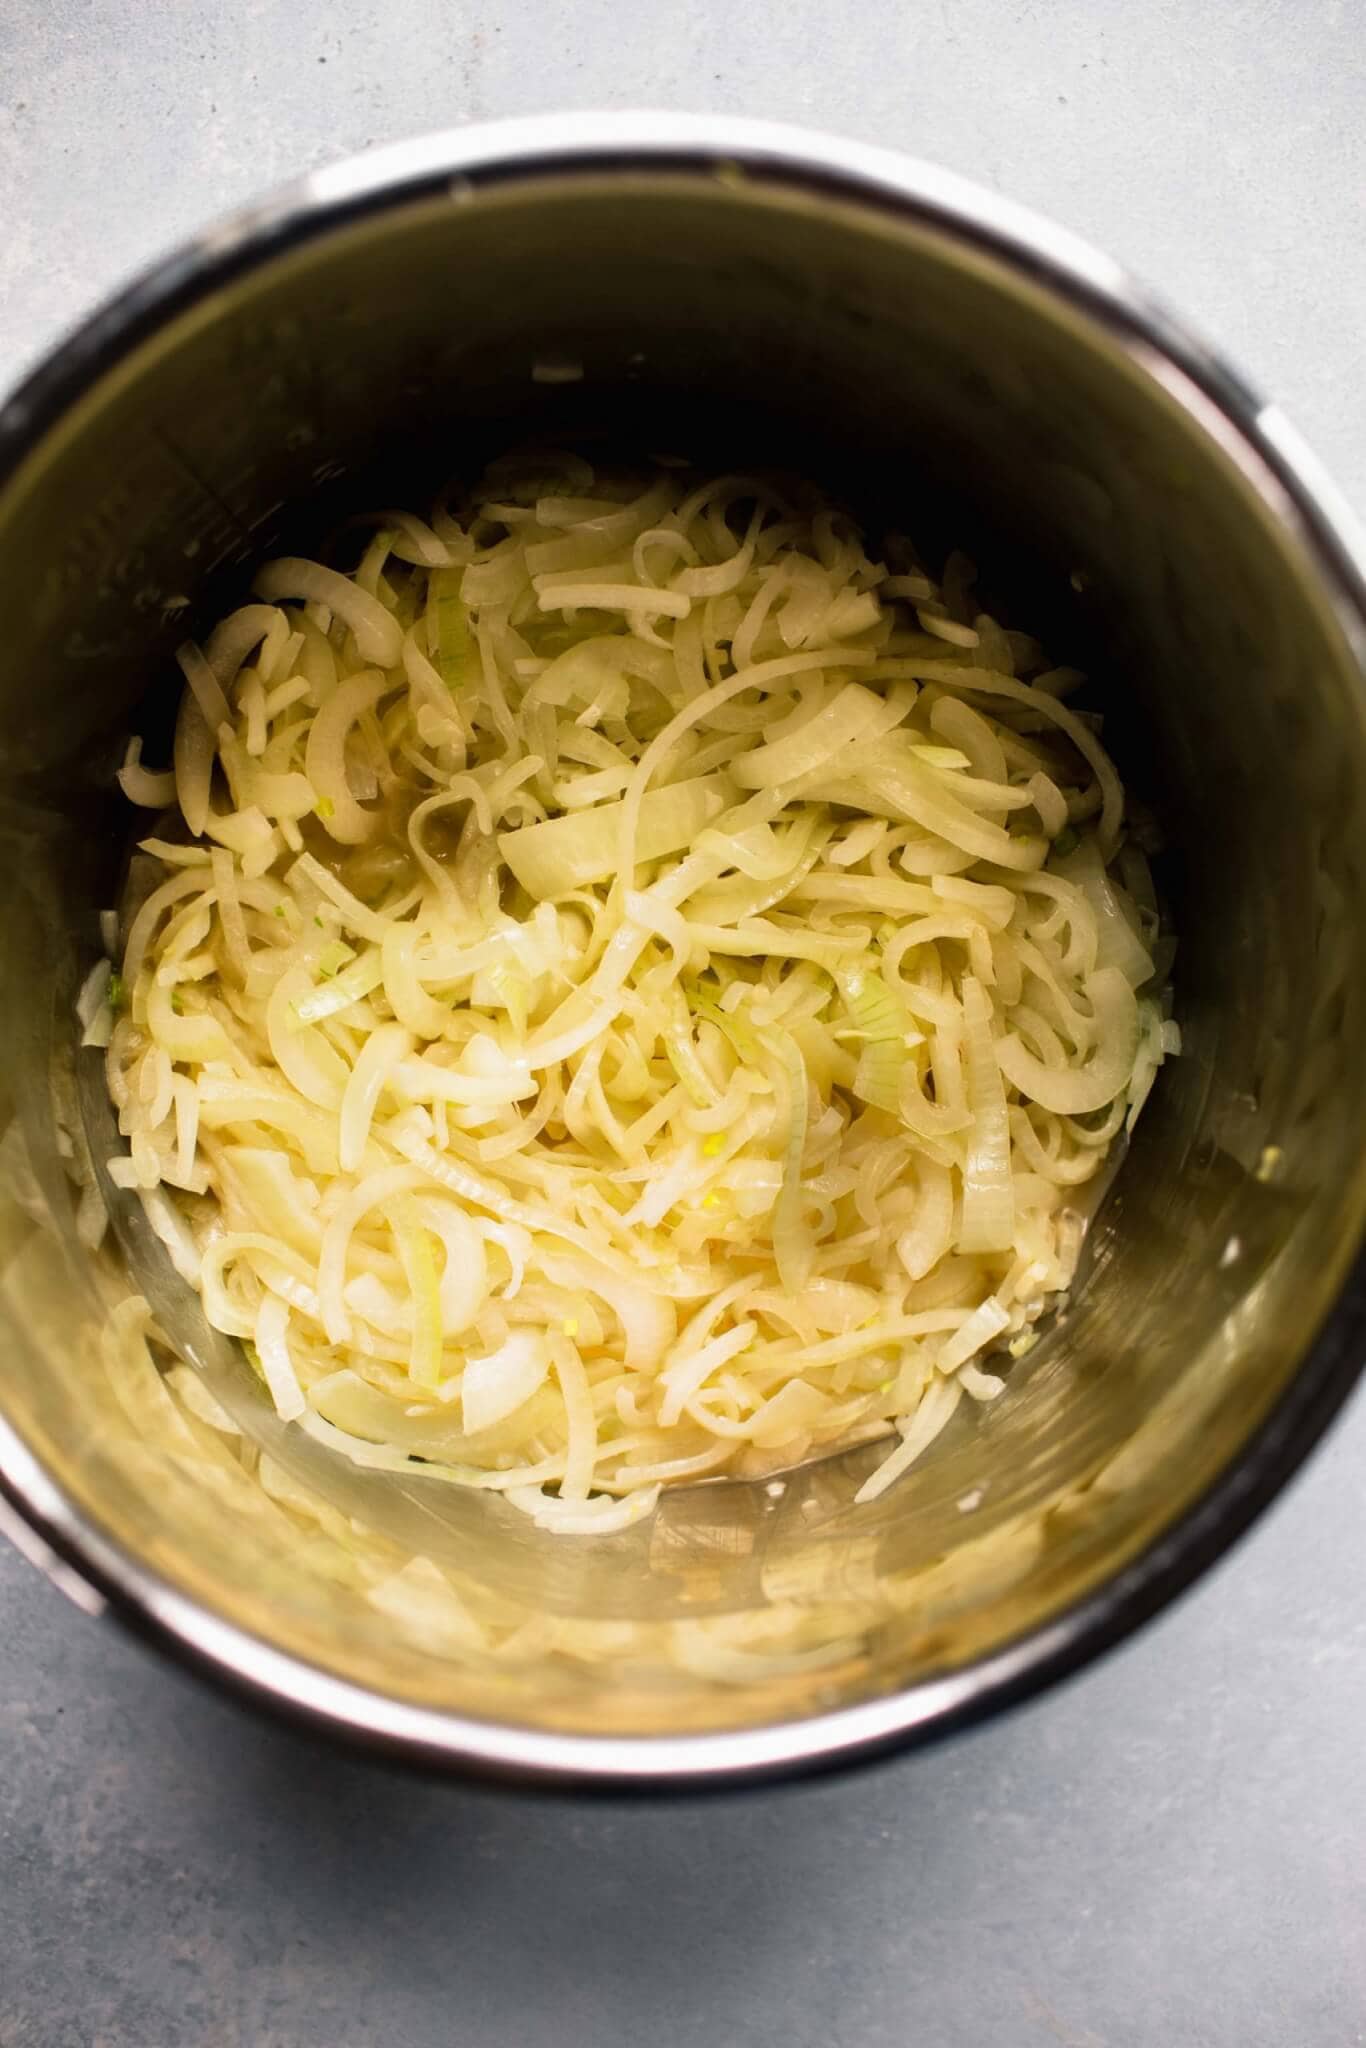 Softened onions in instant pot.